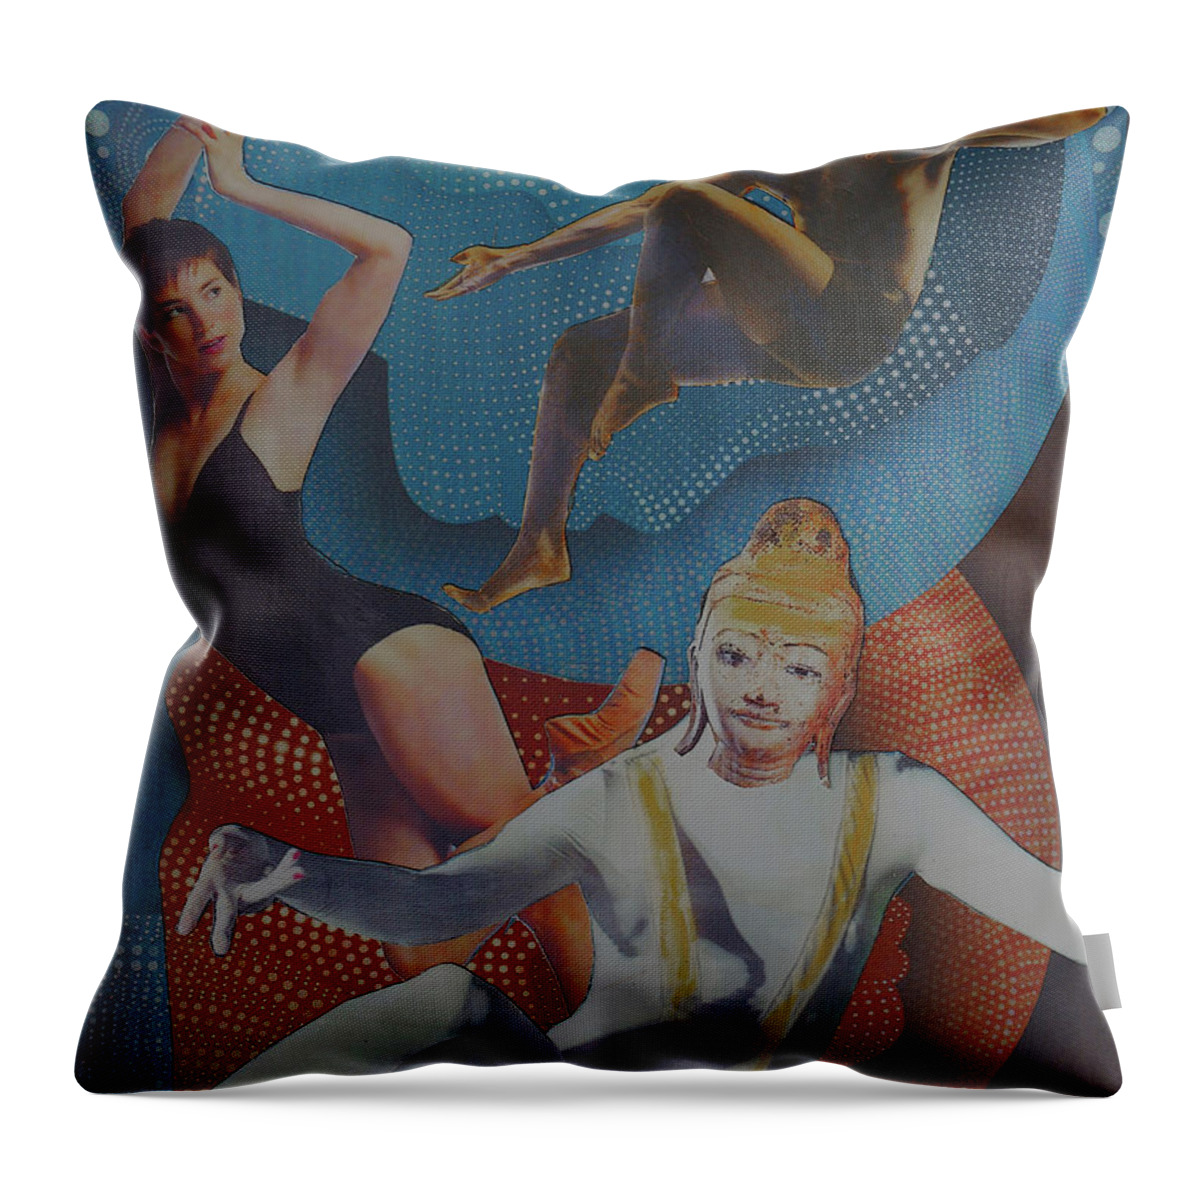 Dancers Throw Pillow featuring the mixed media There's Always Dance by Jessica Levant